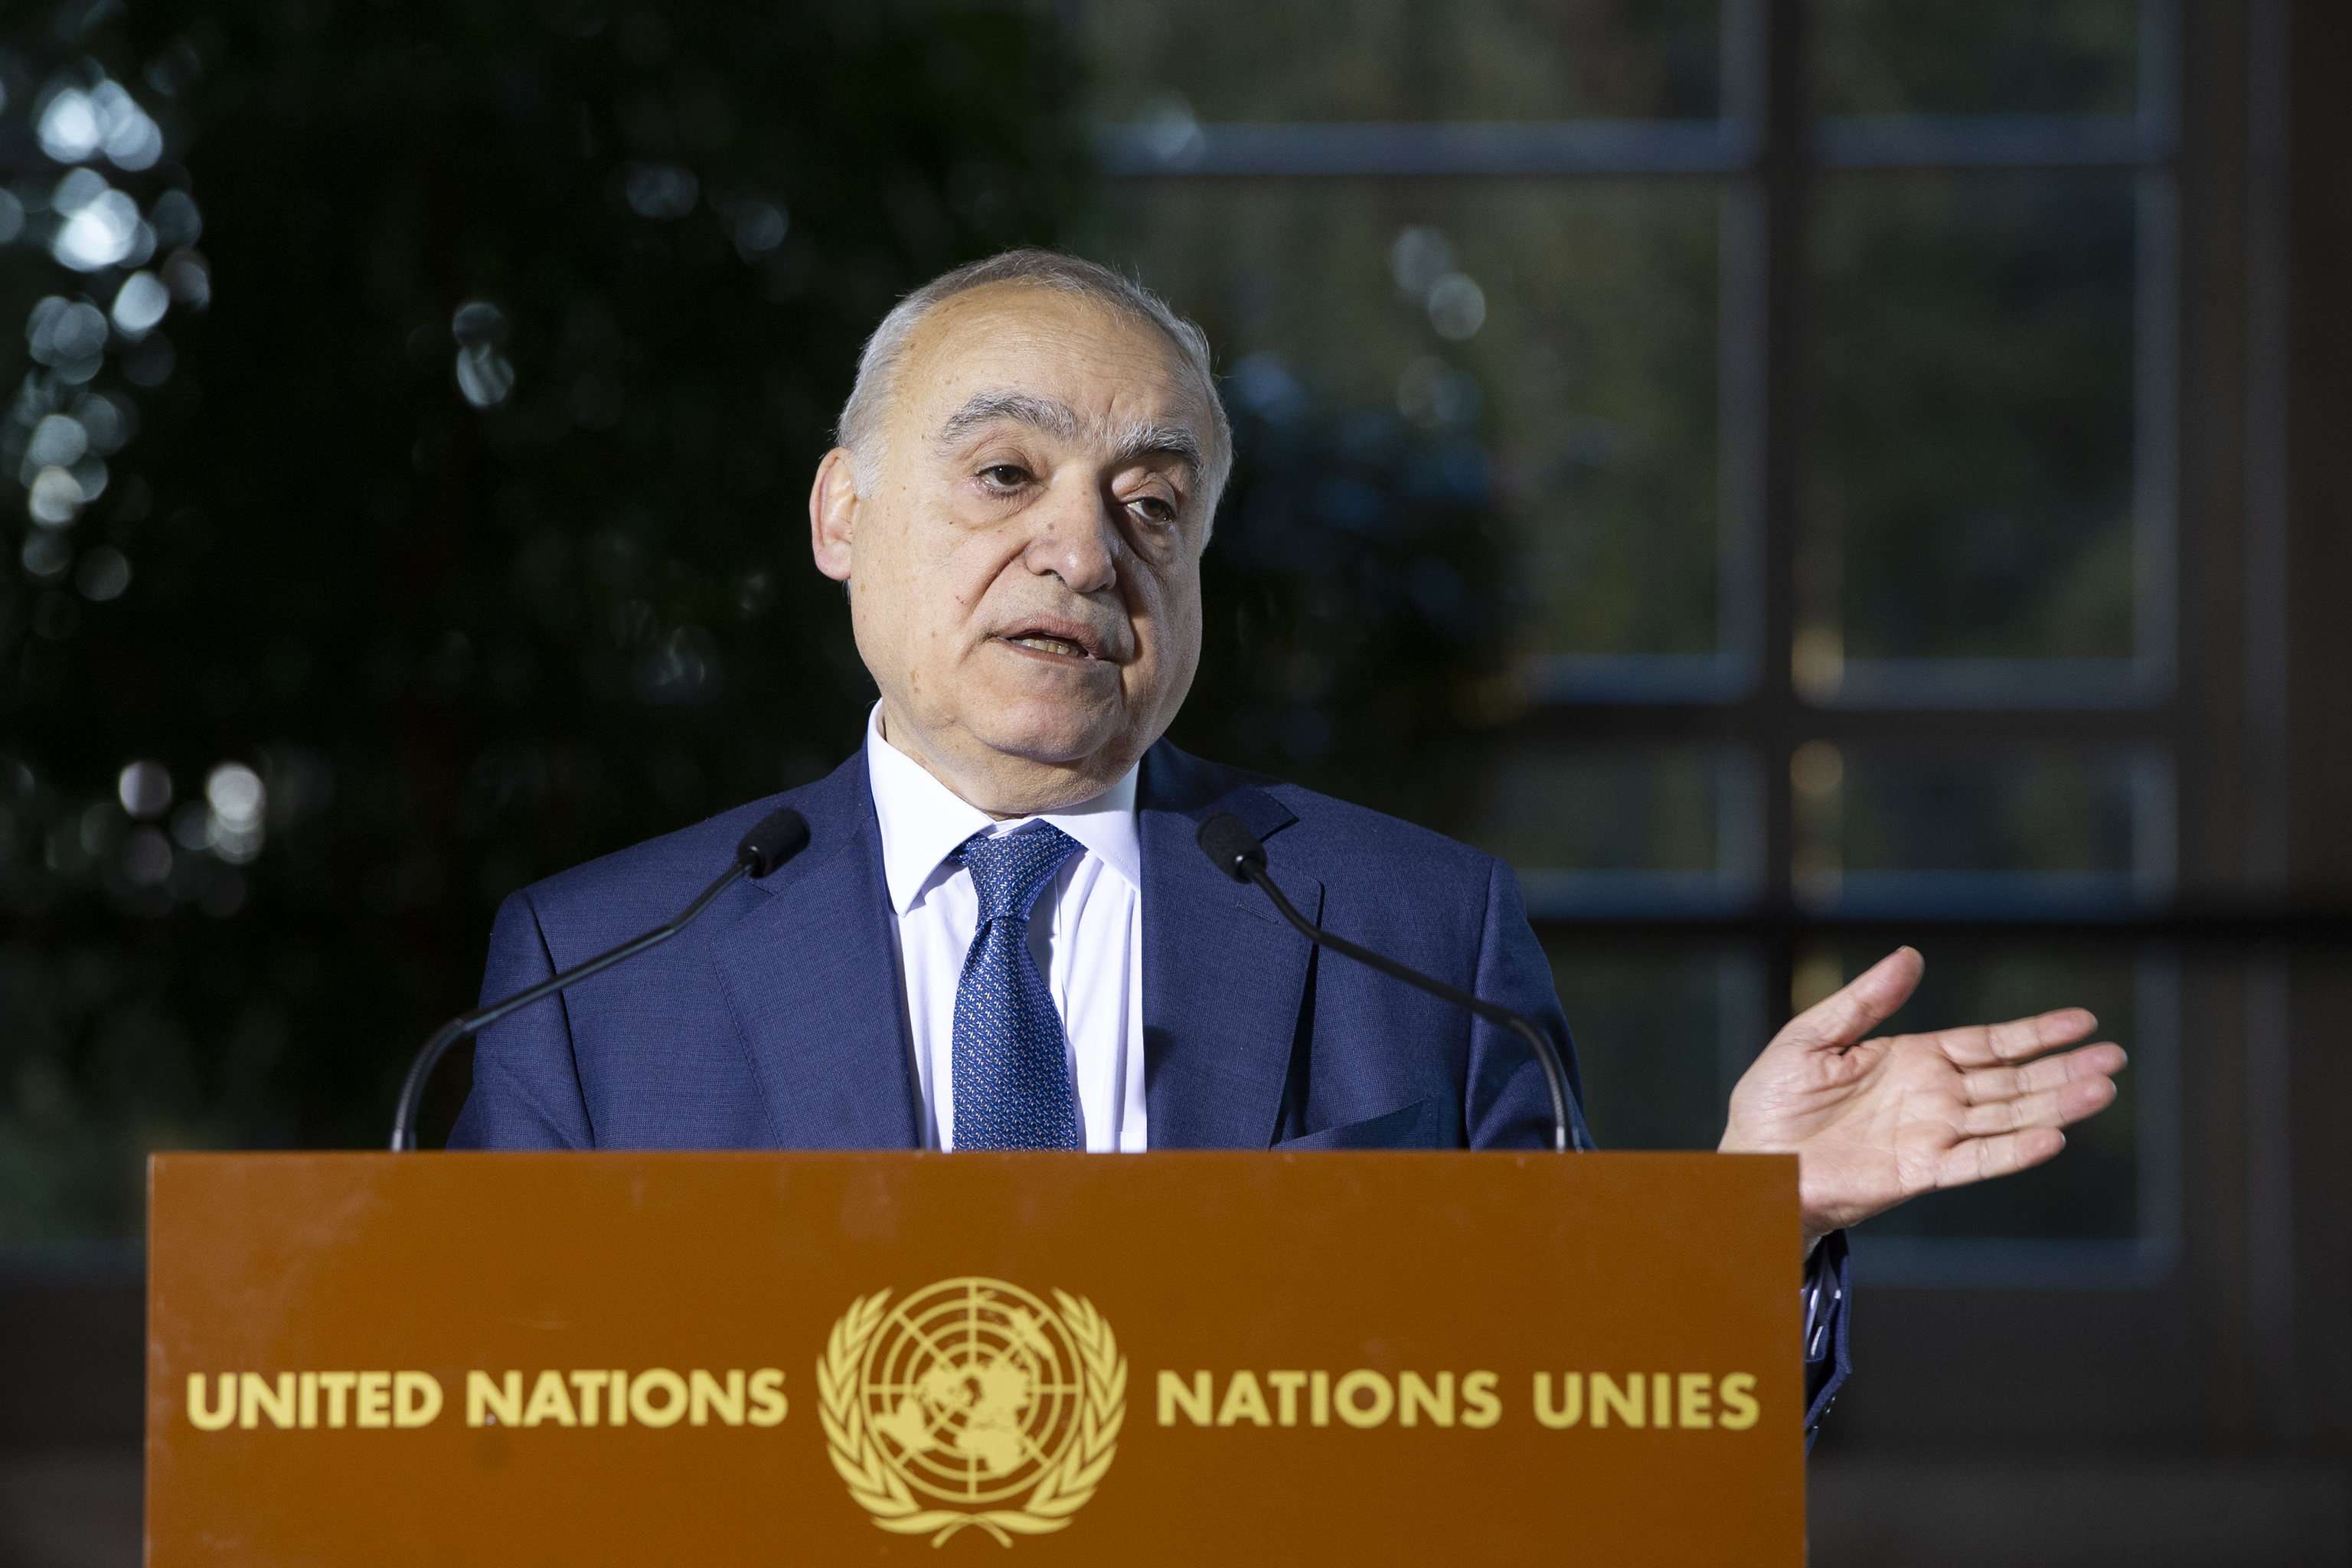 UN envoy Ghassan Salame earlier said the two sides agreed on the need to turn their truce into a full ceasefire 